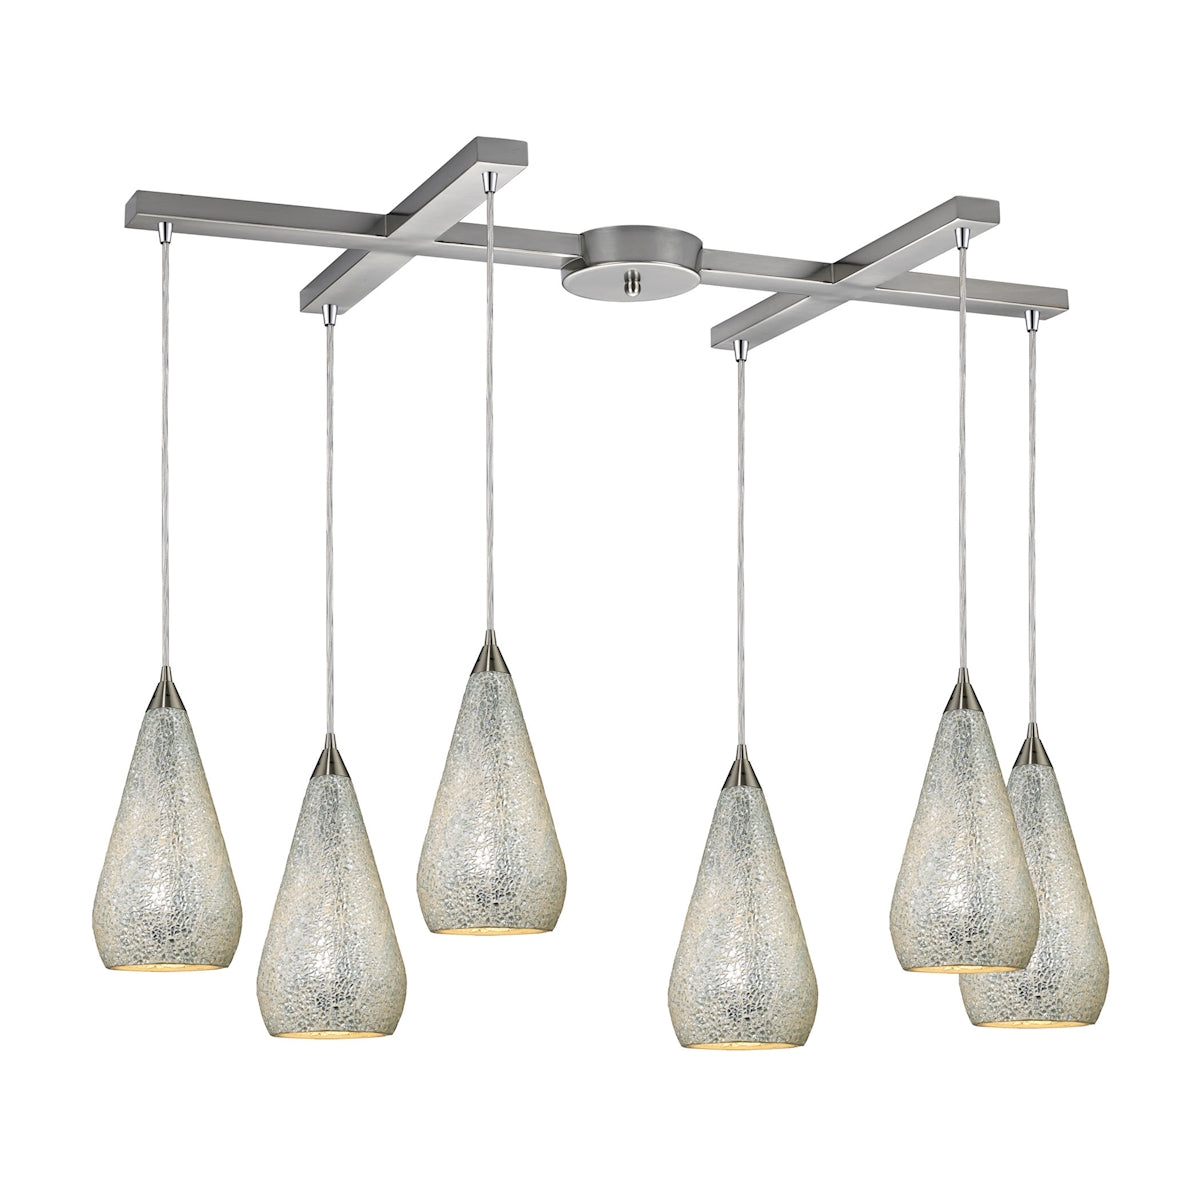 ELK Lighting 546-6SLV-CRC Curvalo 6-Light H-Bar Pendant Fixture in Satin Nickel with Silver Crackle Glass